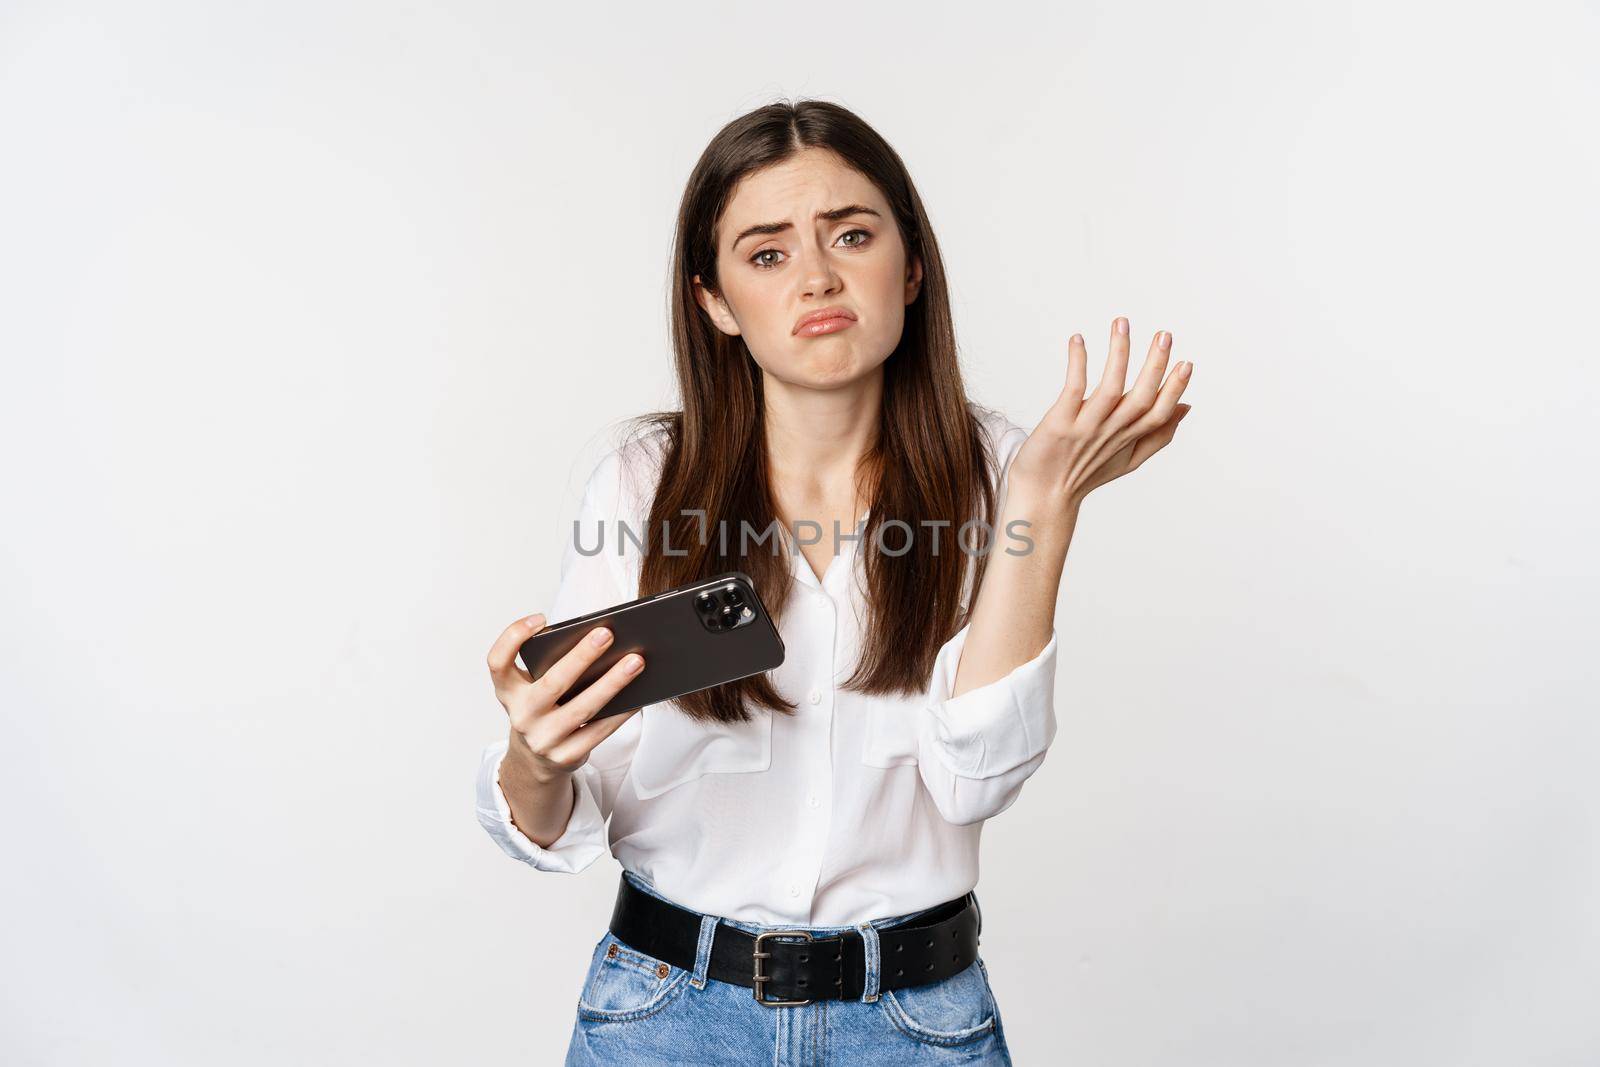 Sad woman losing in mobile video game, looking upset and disappointed at smartphone, sulking, standing over white background.